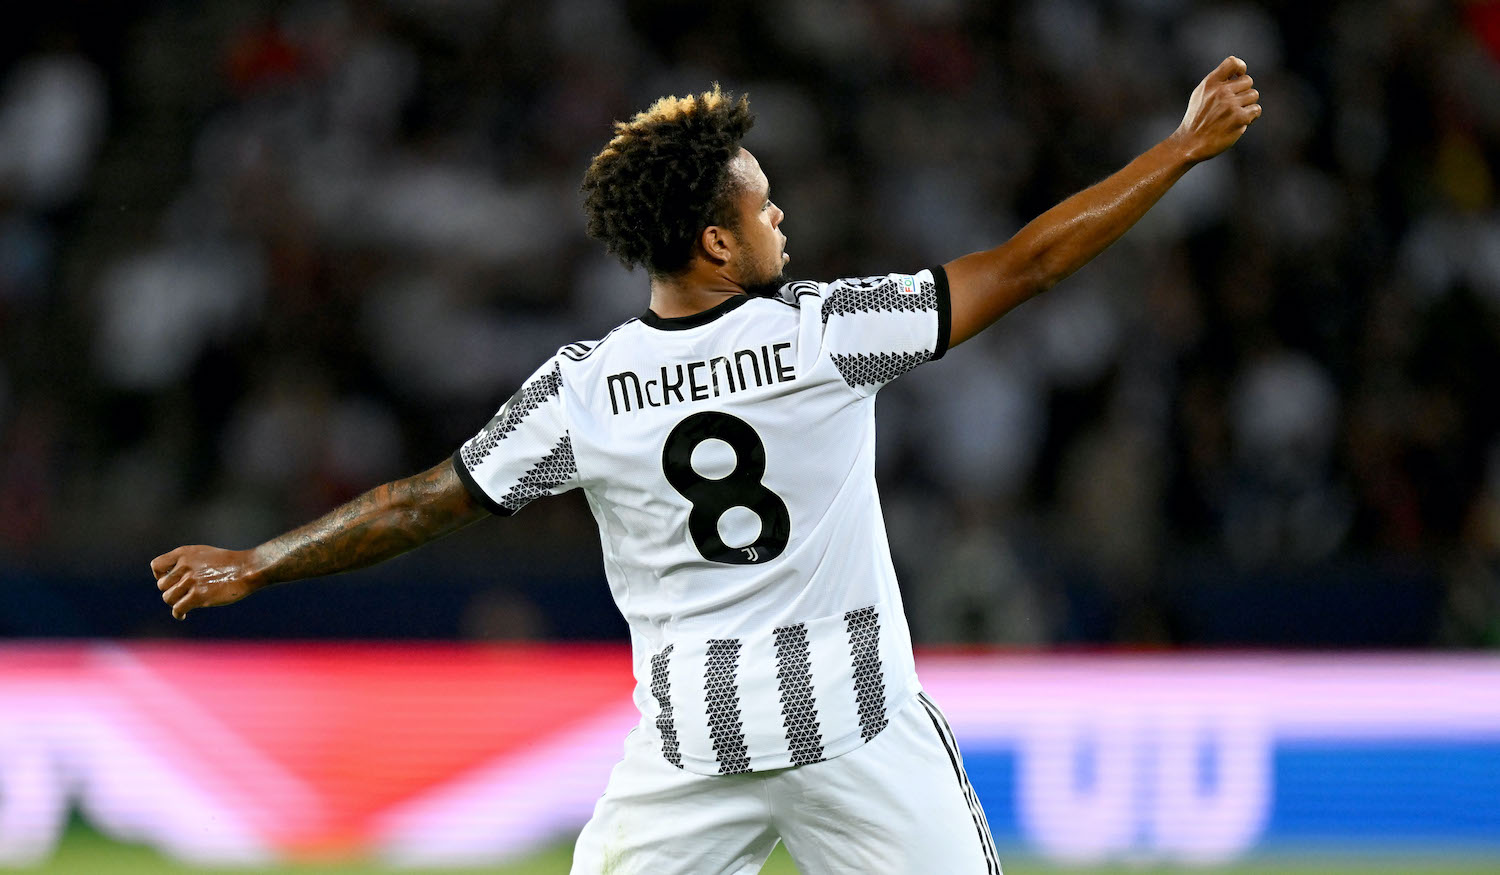 PARIS, FRANCE - SEPTEMBER 06: Weston McKennie of Juventus celebrates after scoring his team's first goal during the UEFA Champions League group H match between Paris Saint-Germain and Juventus at Parc des Princes on September 6, 2022 in Paris, France. (Photo by Harry Langer/DeFodi Images via Getty Images)